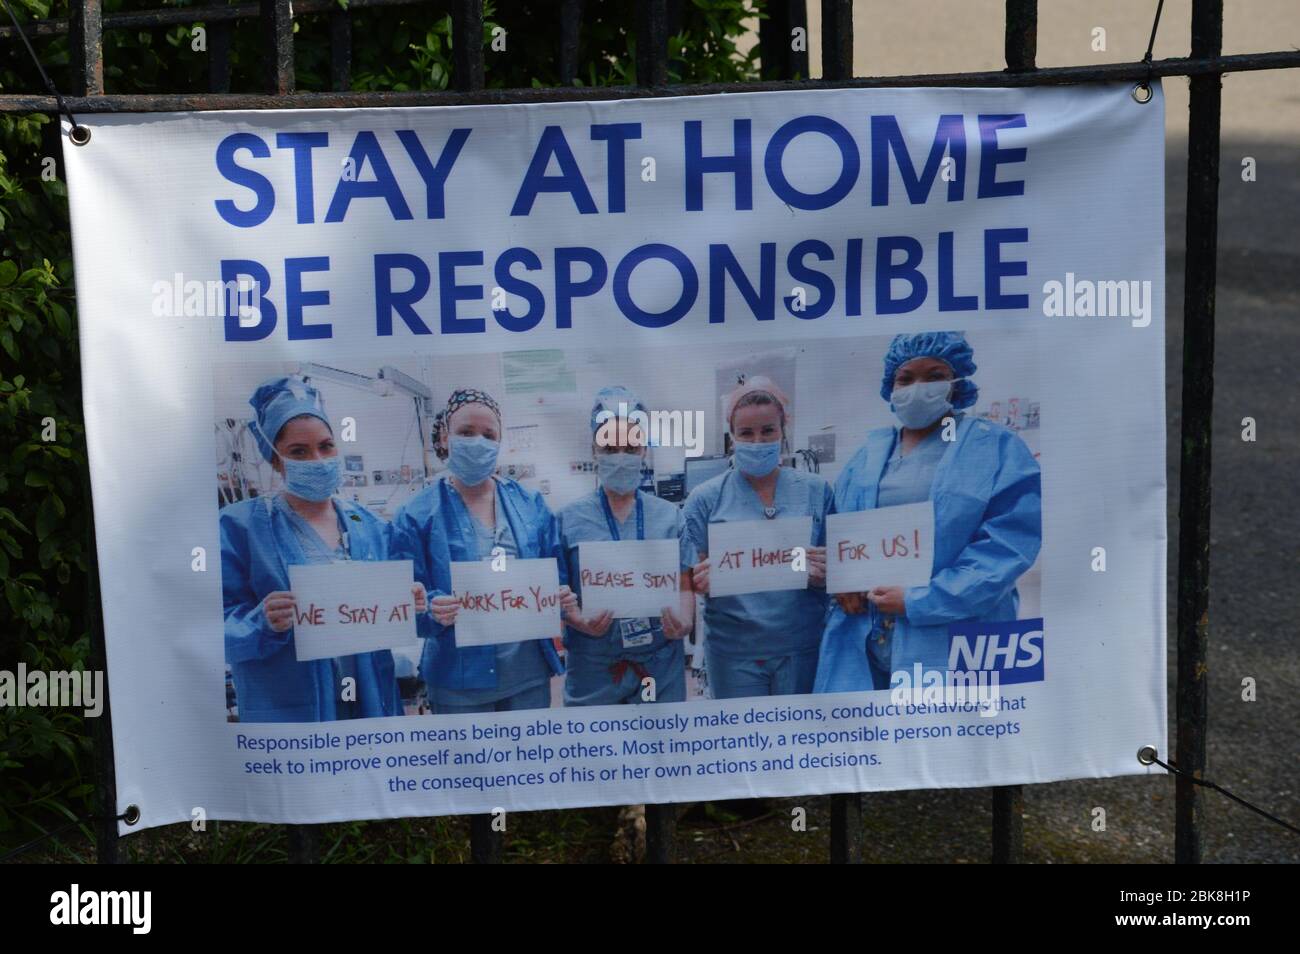 London, UK. 1 May, 2020. A message displayed from the NHS to the public - Stay at Home, Be Responsible at Acton Green Common. Stock Photo